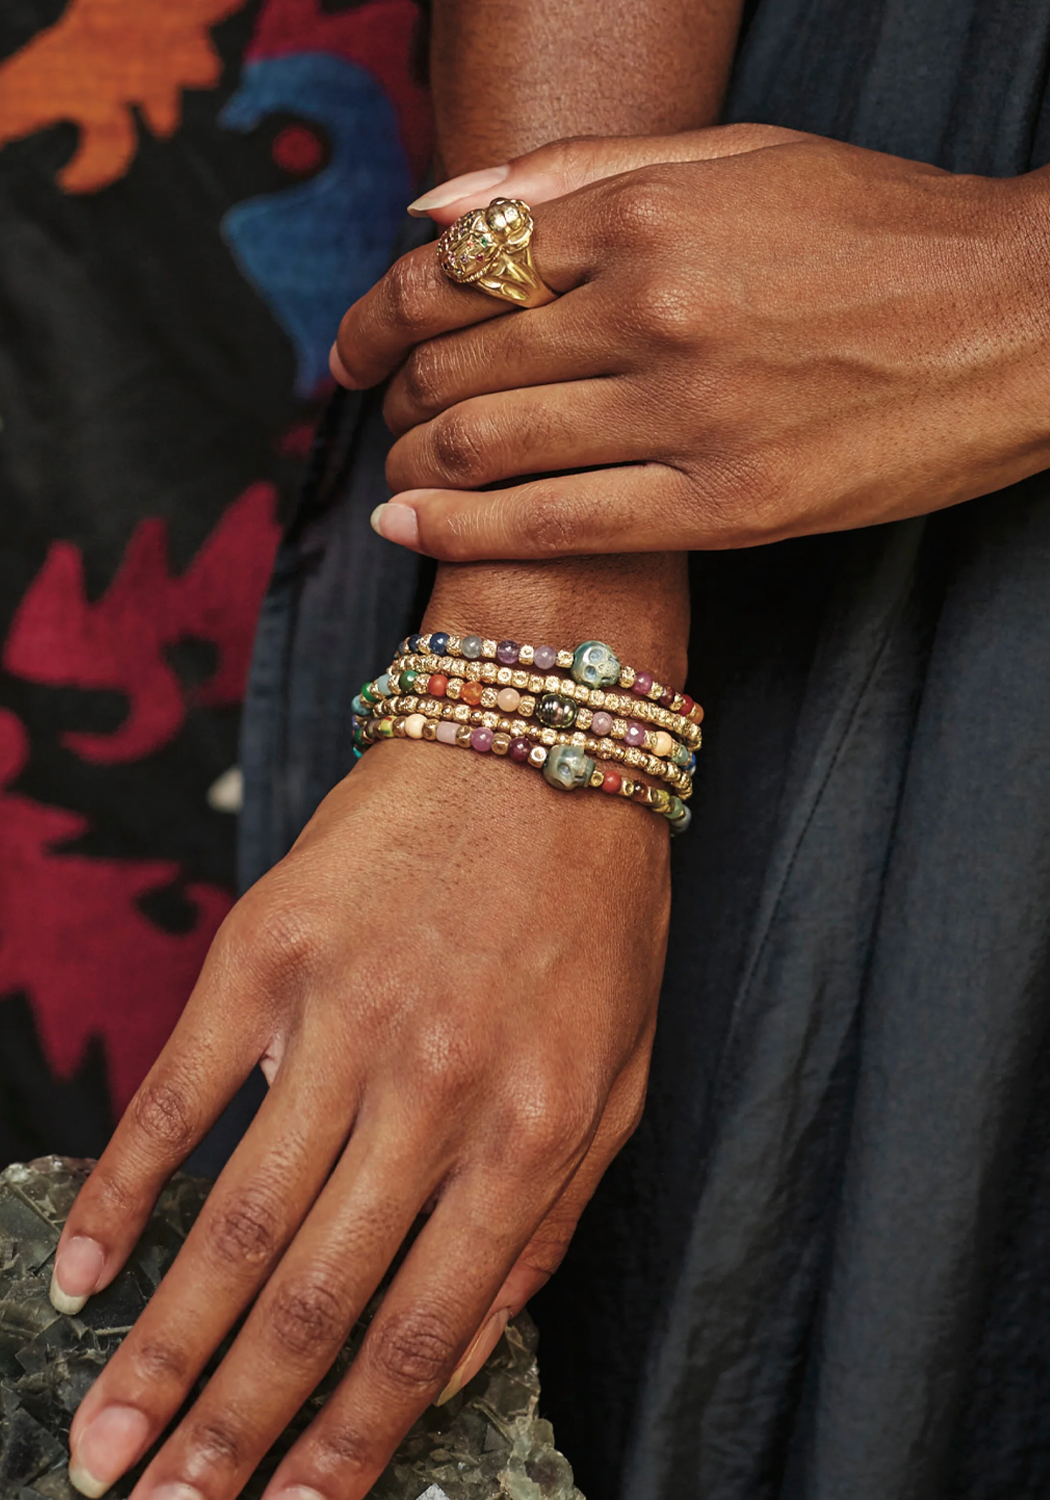 Is This the World's Most Glamorous Bracelet Stack? – JCK